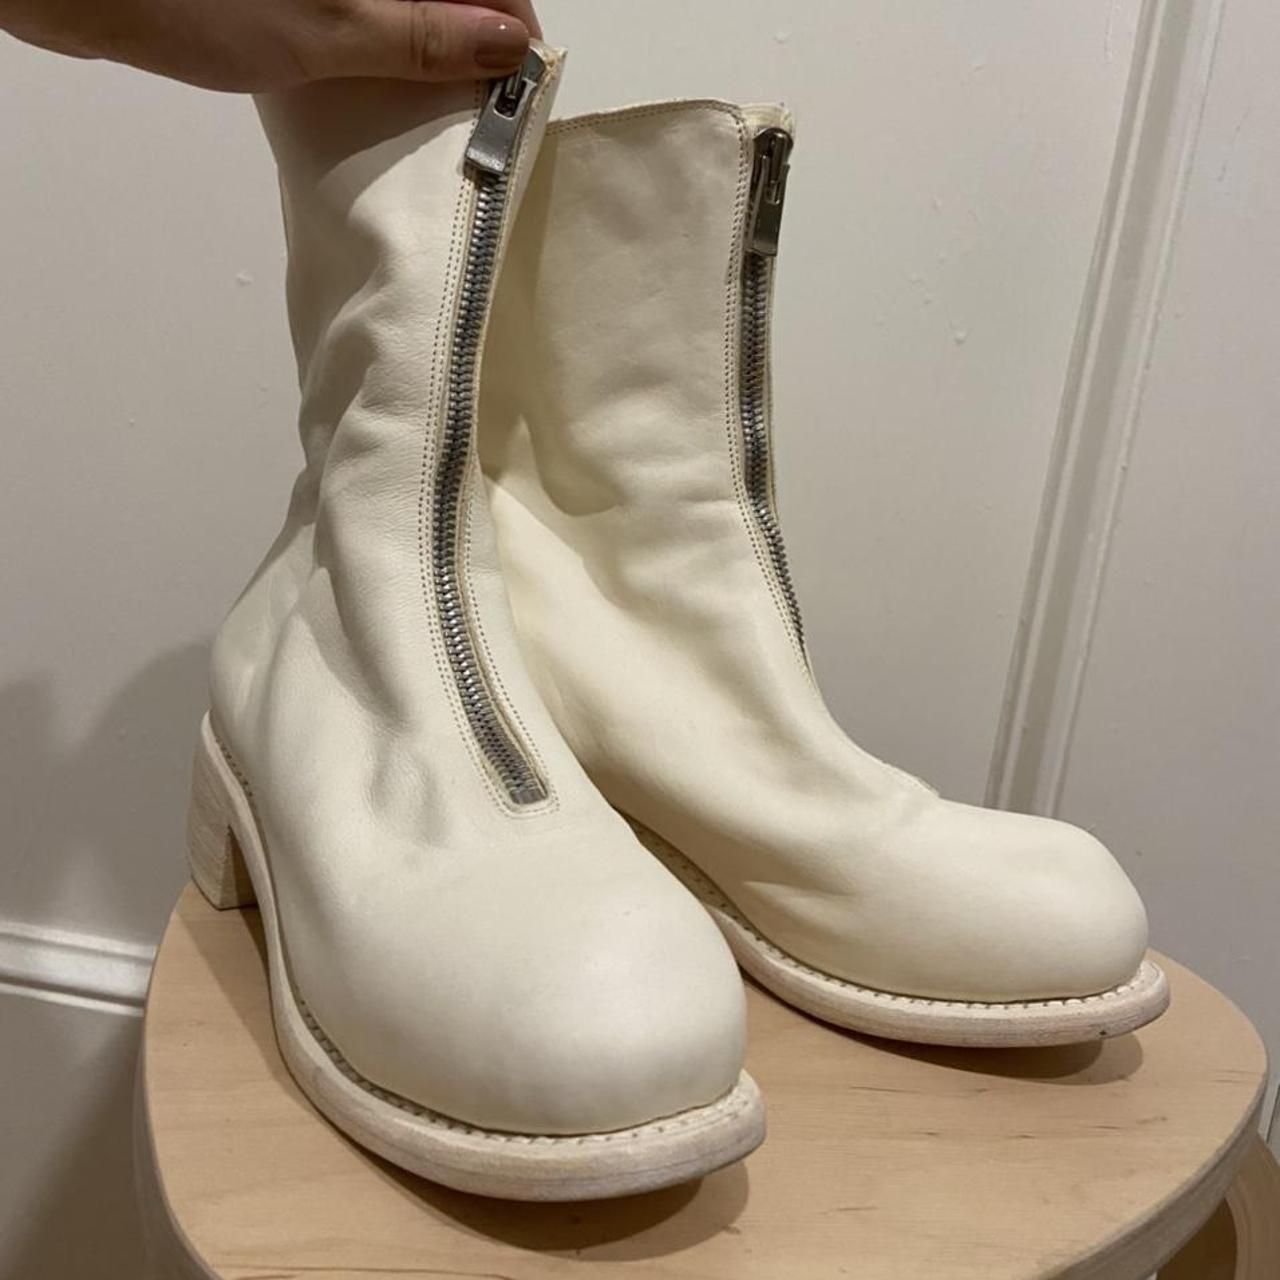 Product Image 3 - WHITE GUIDI BOOTS WITH ZIPPER!

Excellent